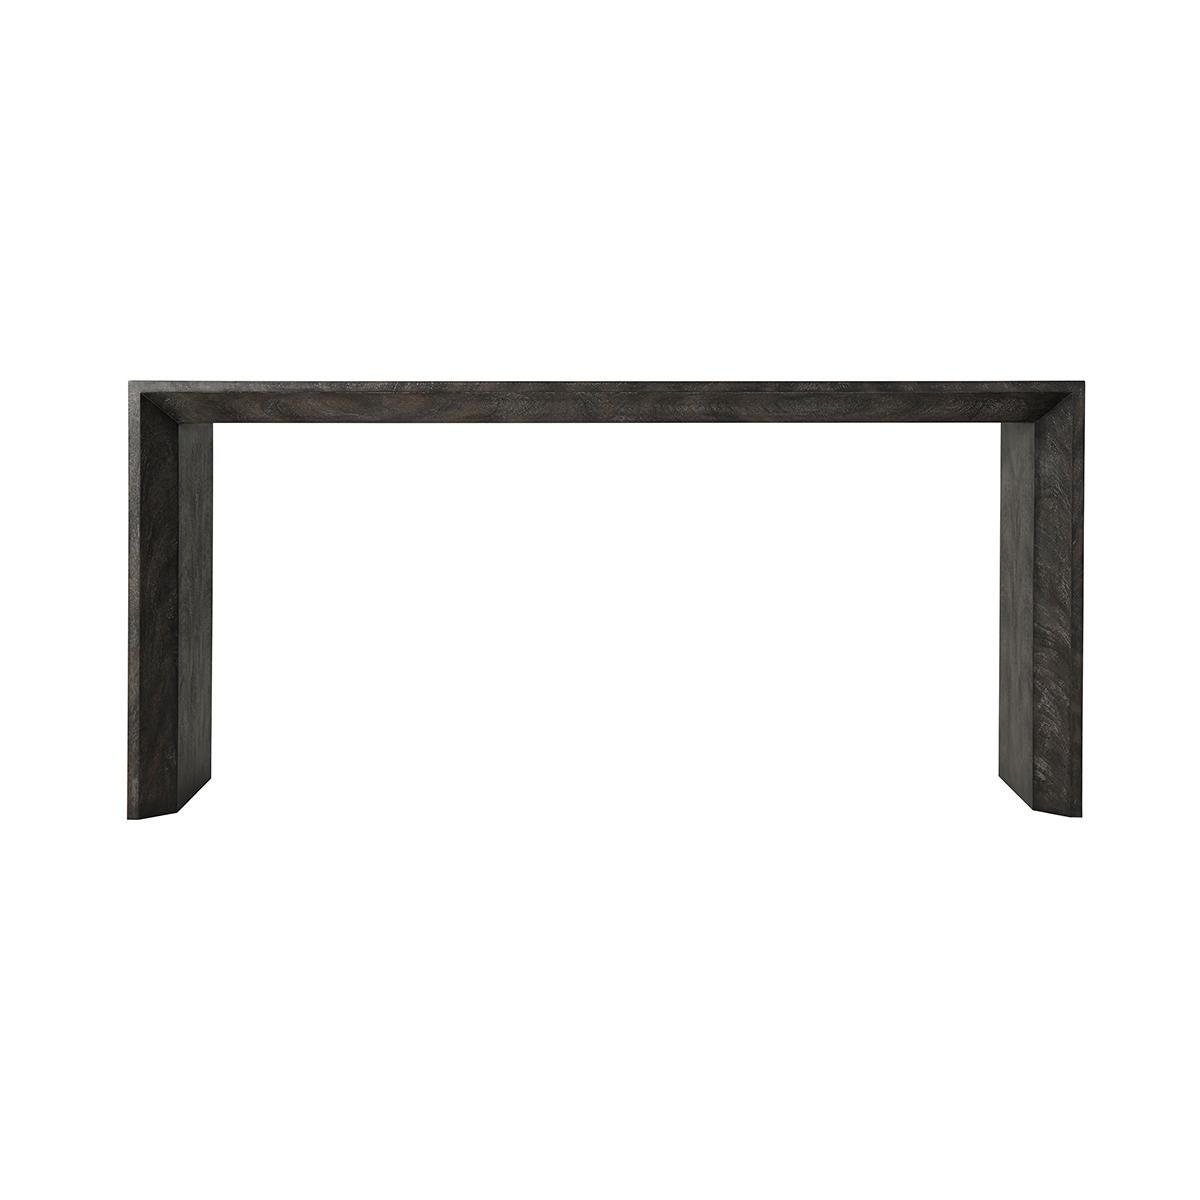  a stylish and functional addition to any living space. This sleek and versatile table is designed to enhance the aesthetic appeal of your home while providing practical display options.

Crafted with meticulous attention to detail, the console